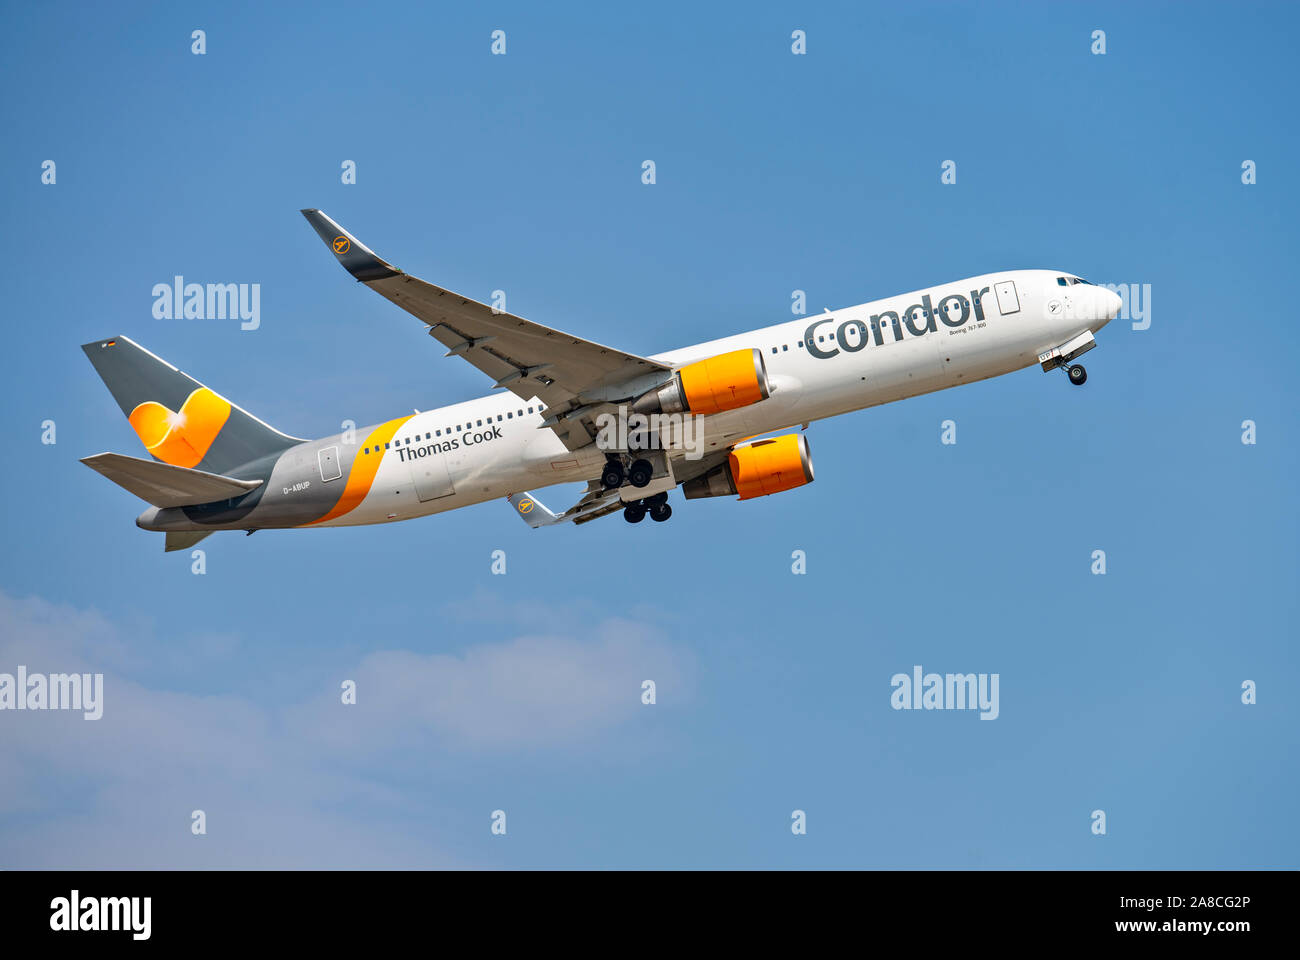 Frankfurt, Hesse/Germany - July 23 2019Condor aircraft (Boeing 767-300 - D-ABUP) taking off from Frankfurt Airport Stock Photo